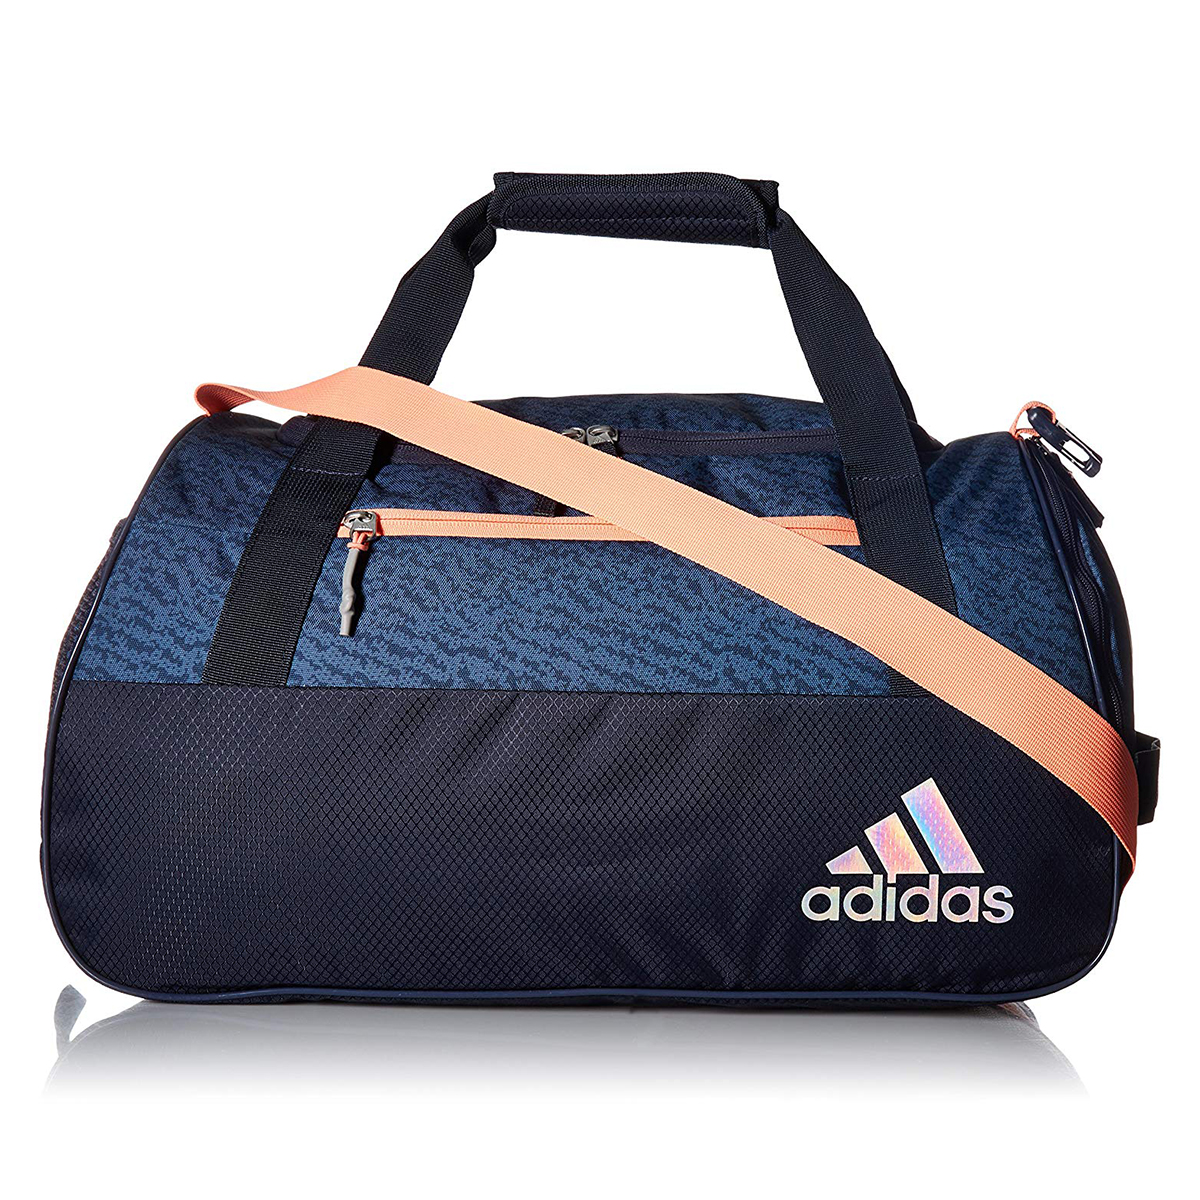 This Adidas Gym Bag Is So Cute You’ll Want to Carry It Everywhere